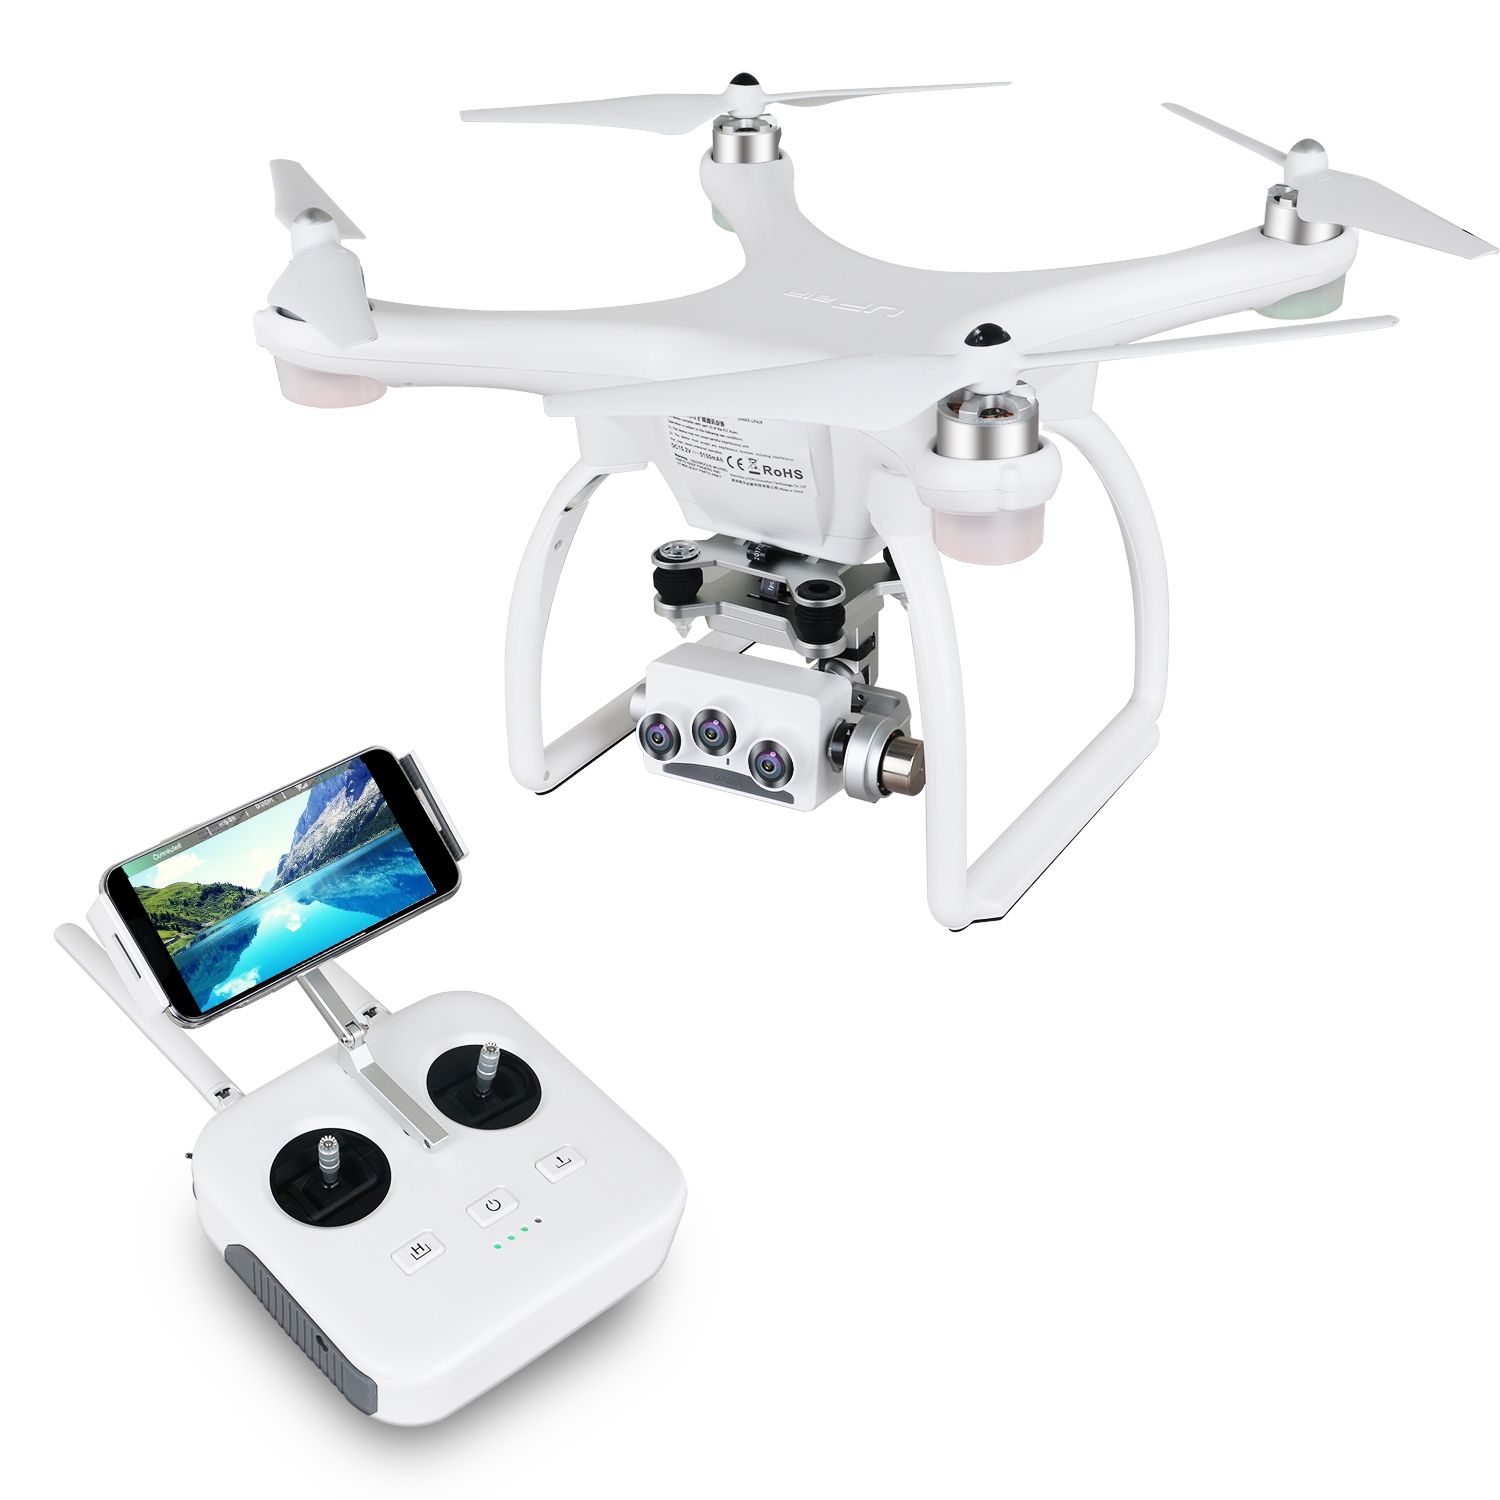 $299 for UPair 2 Ultrasonic 5.8G WiFi 1KM FPV 3D + 4K + 16MP Camera With 3 Axis Gimbal GPS RC Quadcopter Drone RTF